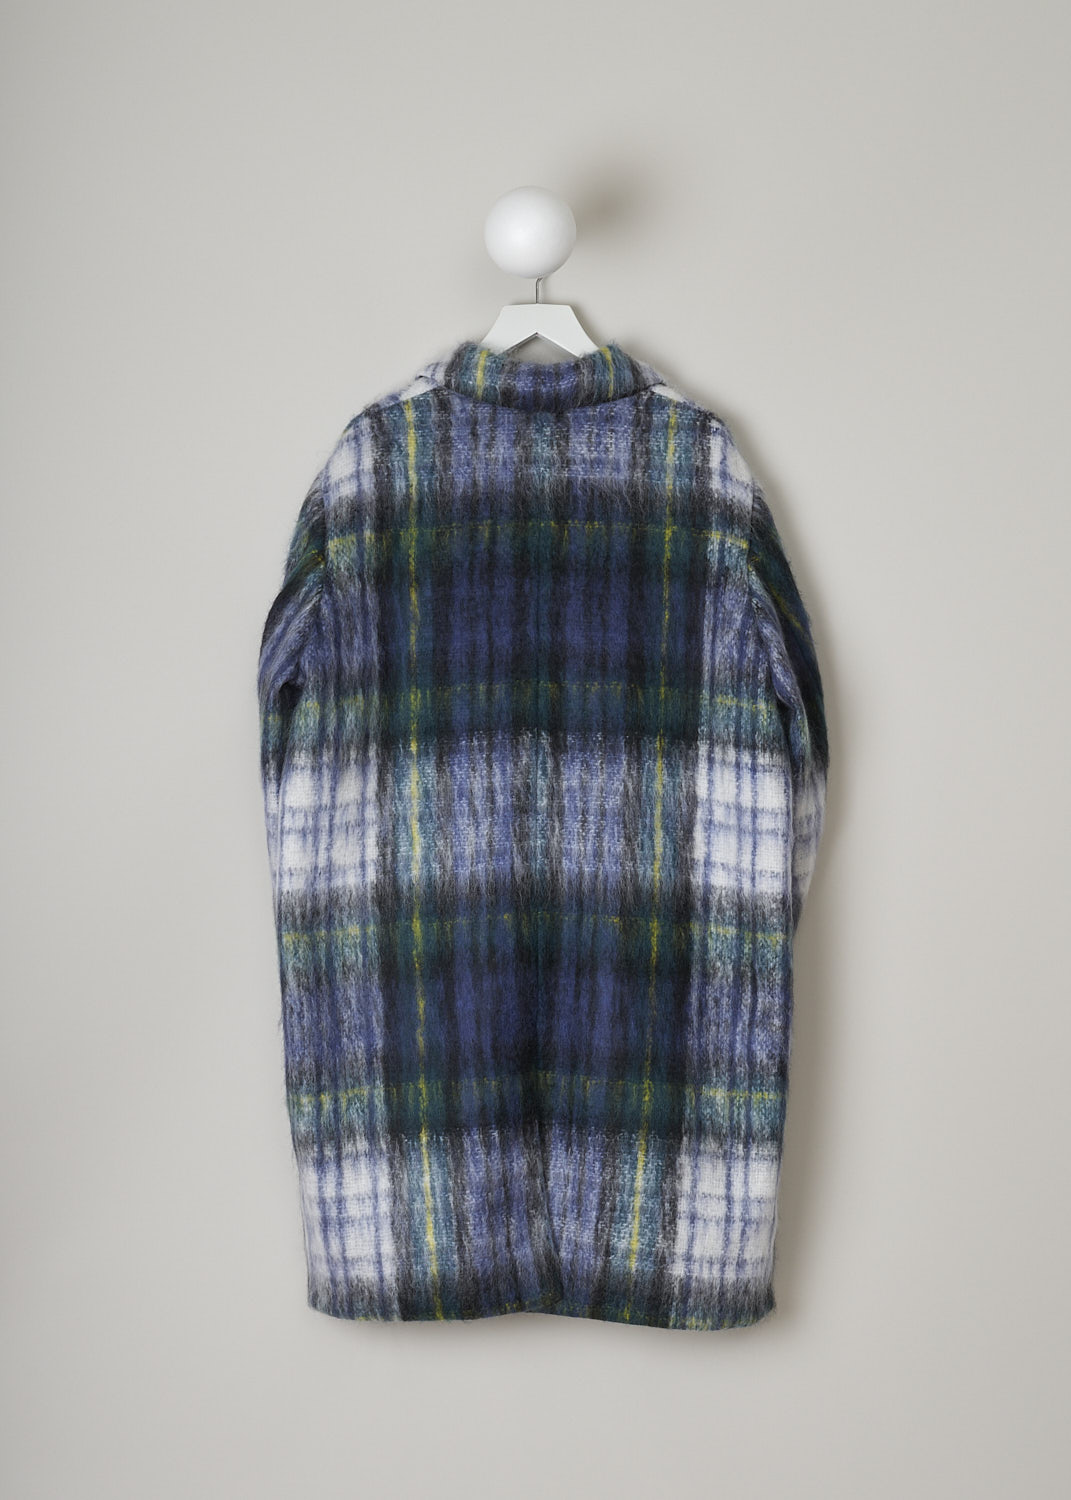 SOFIE Dâ€™HOORE, GREEN TARTAN CHERYL COAT, CHERYL_WOMO_GREEN_TARTAN, Green, Blue, Print, Back, This green tartan mohair-blend  Cheryl coat is single-breasted with a spread collar and a concealed front button closure. In the front, the coat has two flap welt pockets. A centre vent can be found in the back. The coat has an oversized fit and is fully lined. 